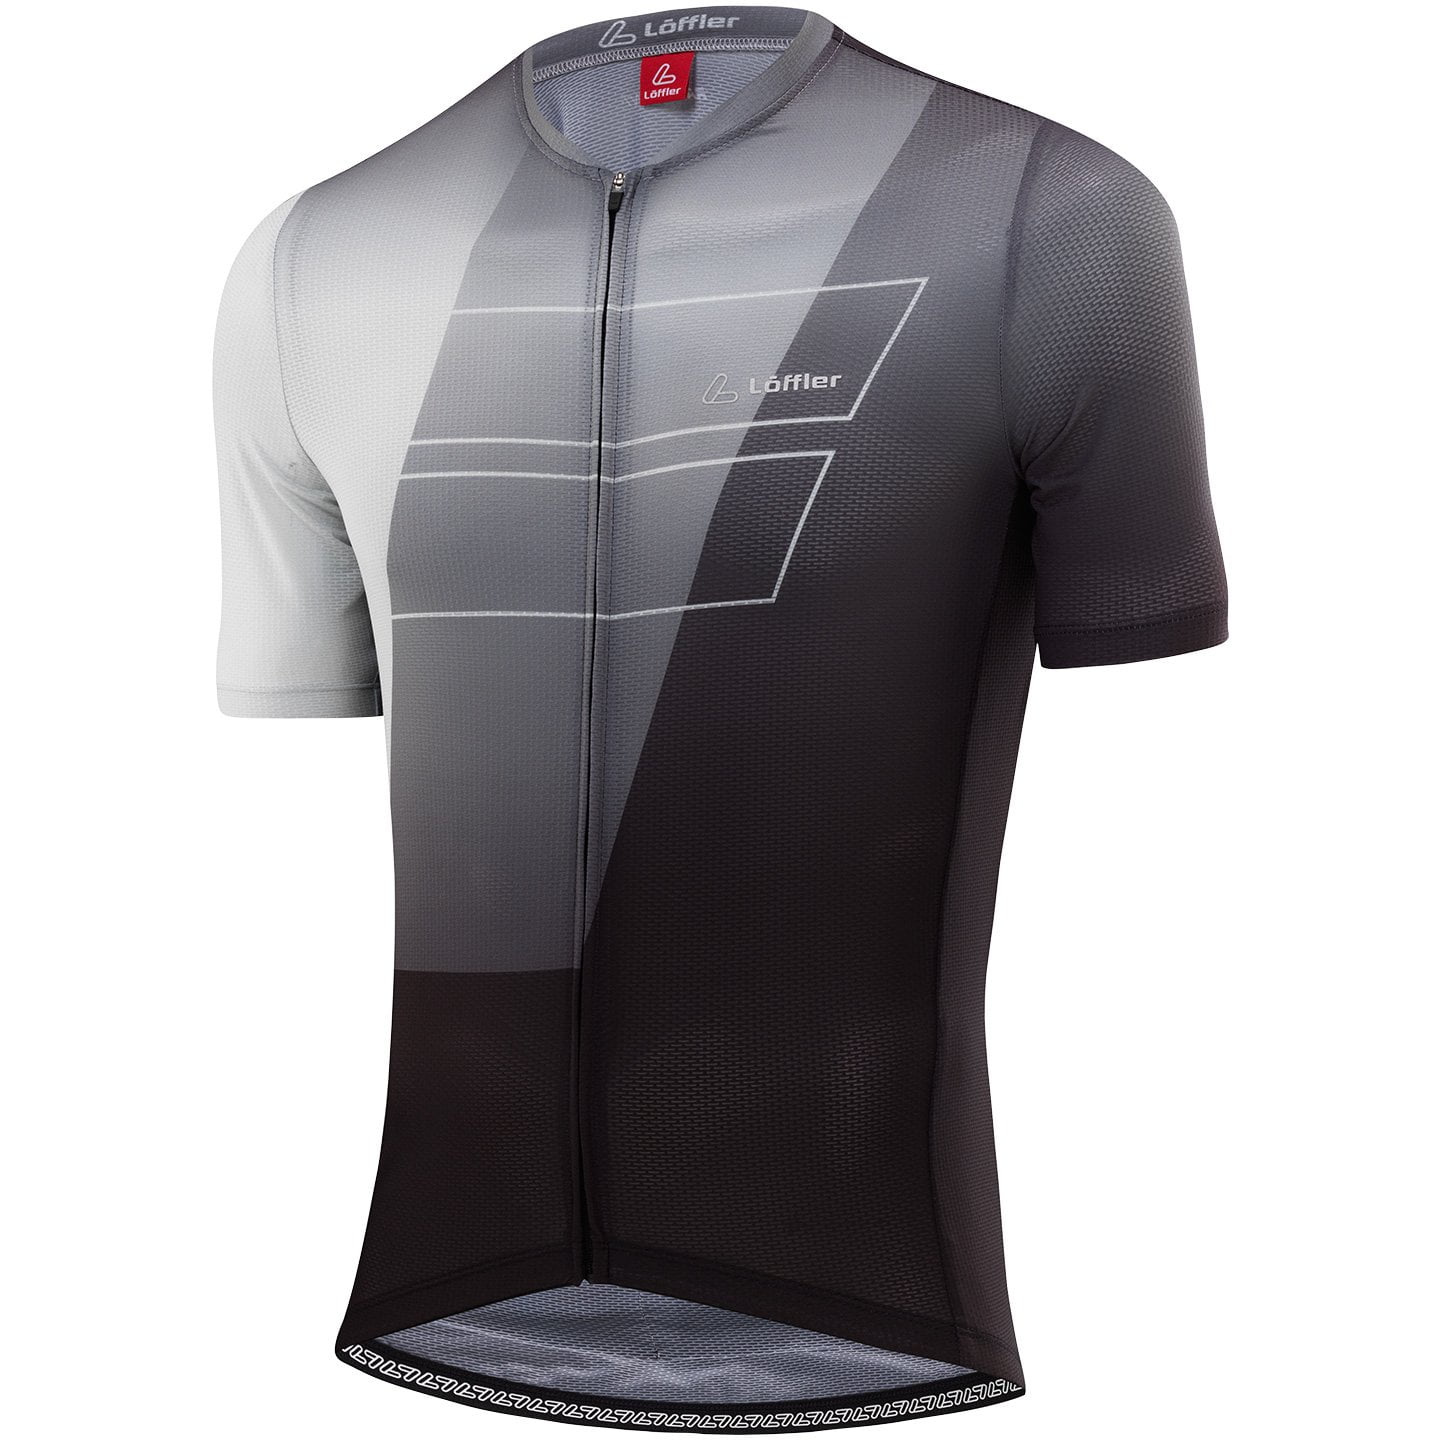 LOFFLER Vent Short Sleeve Jersey Short Sleeve Jersey, for men, size L, Cycling jersey, Cycling clothing